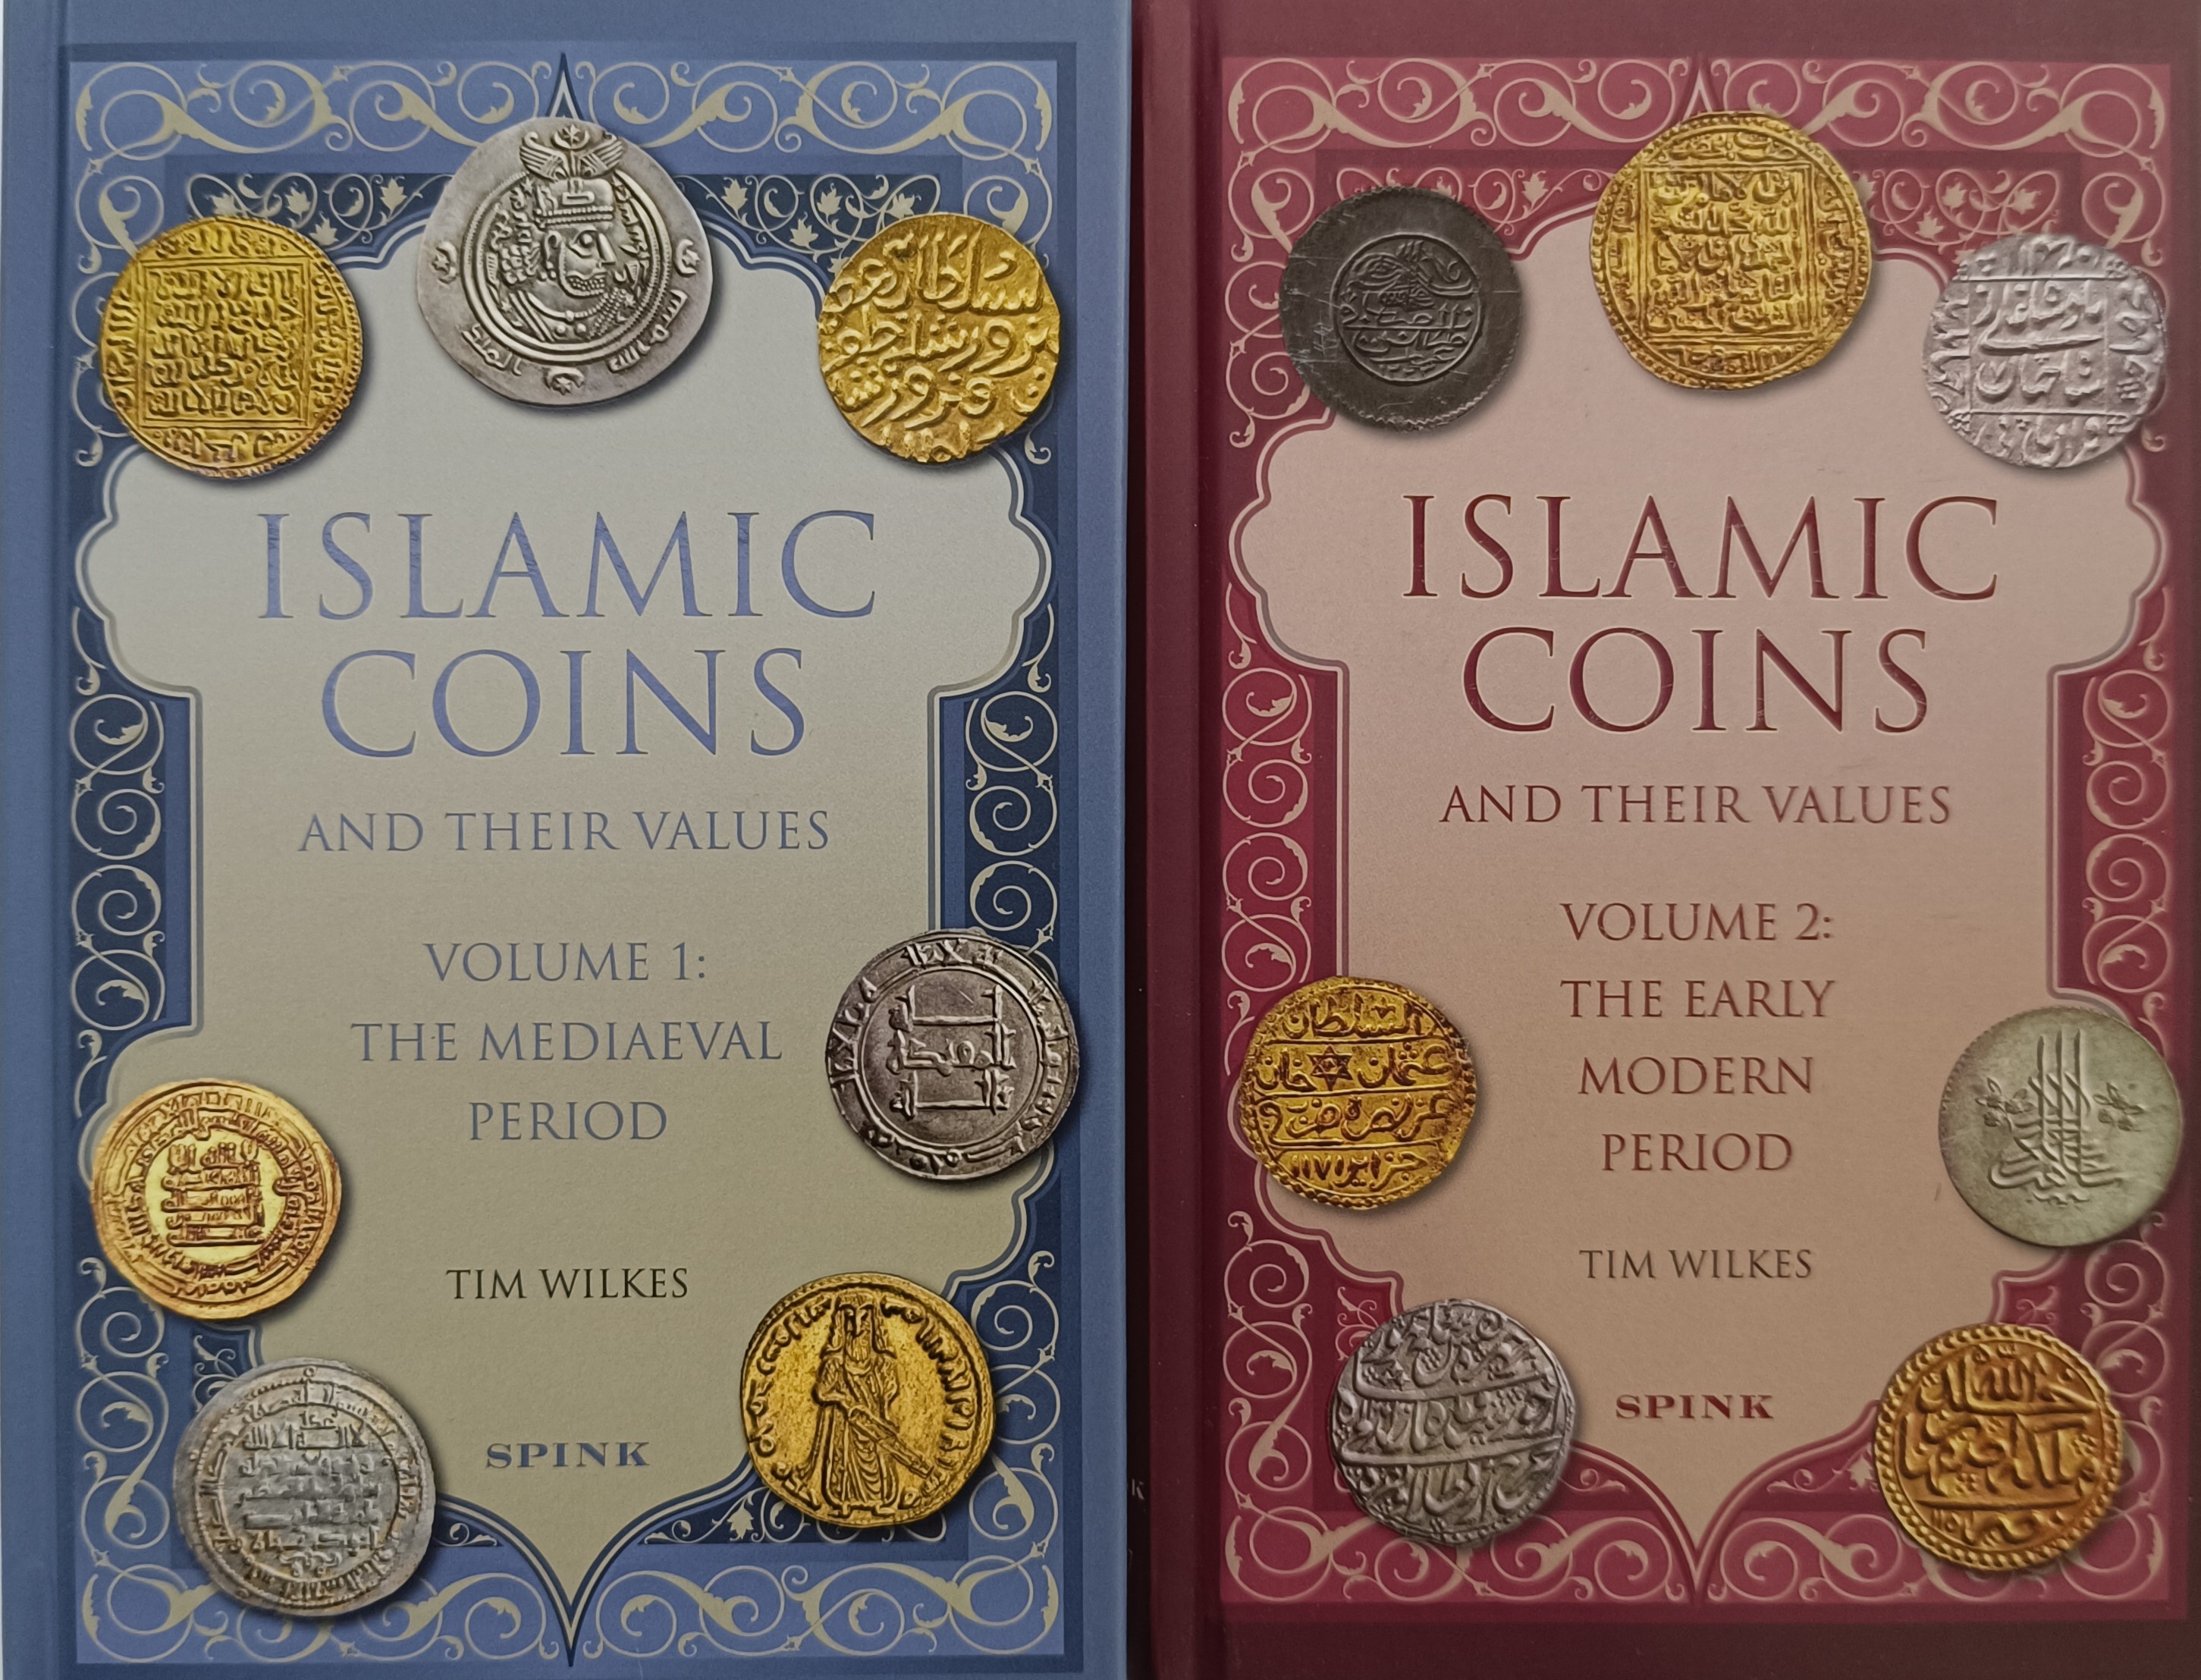 Islamic coins and their values (Volume I & II)